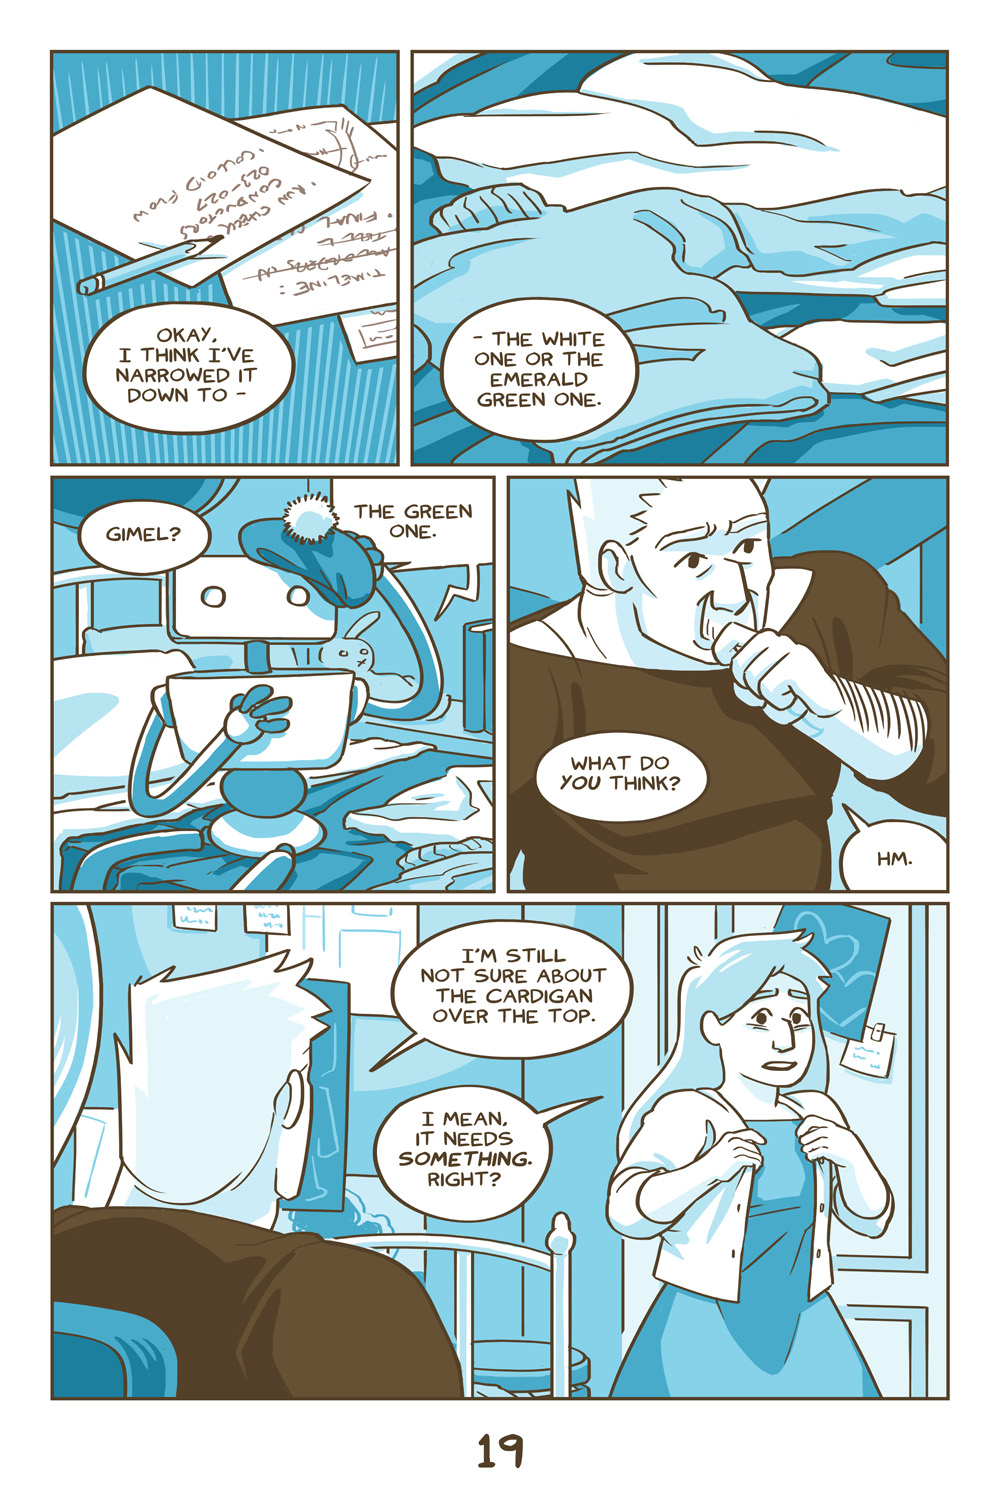 Chapter 8, Page 19